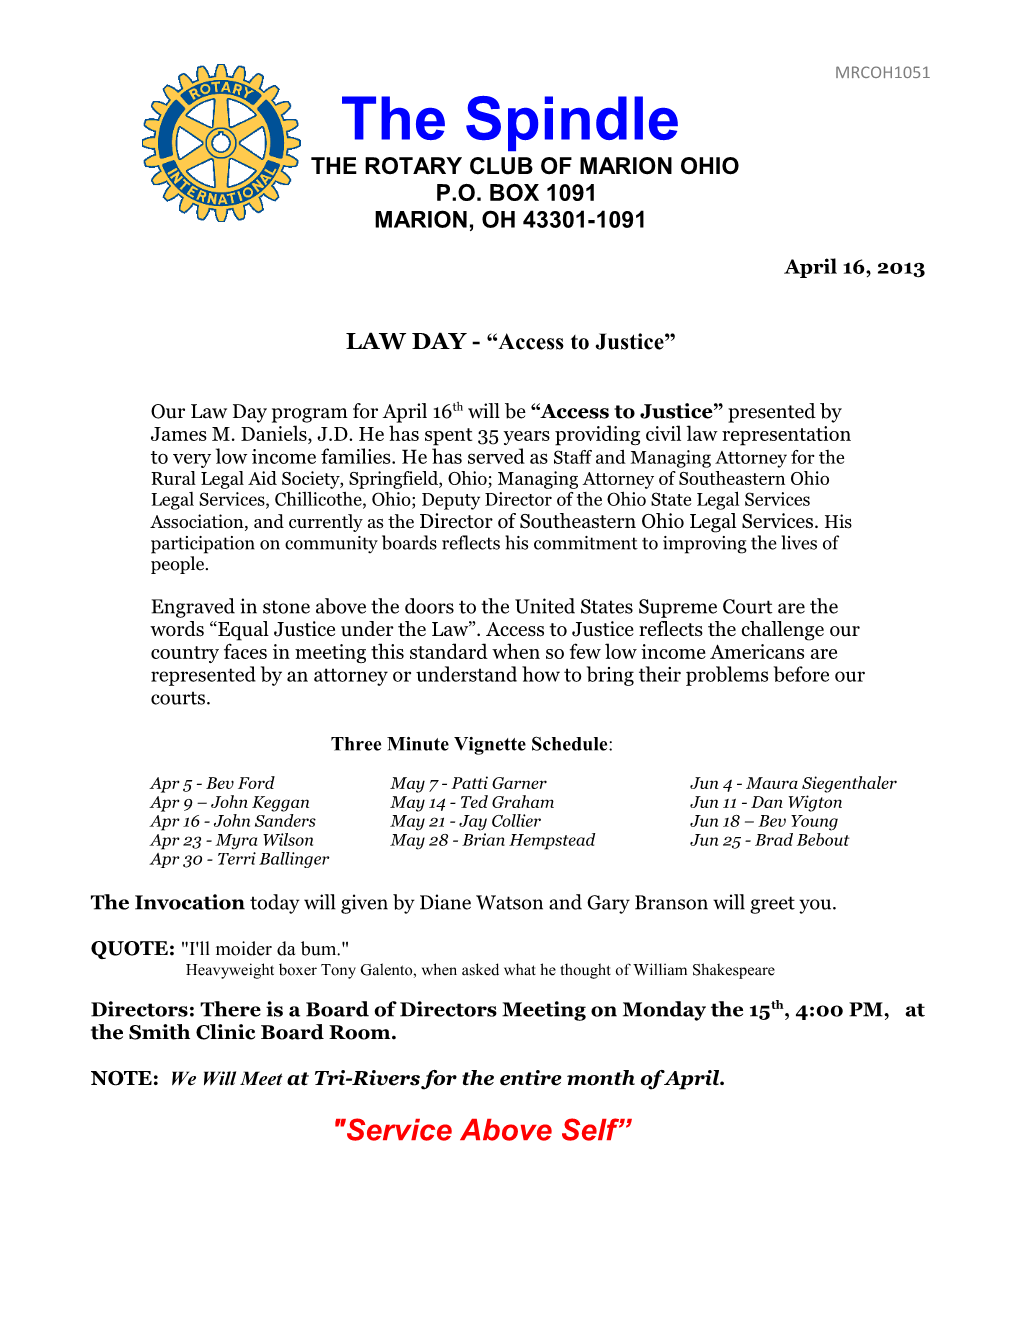 LAW DAY - Access to Justice